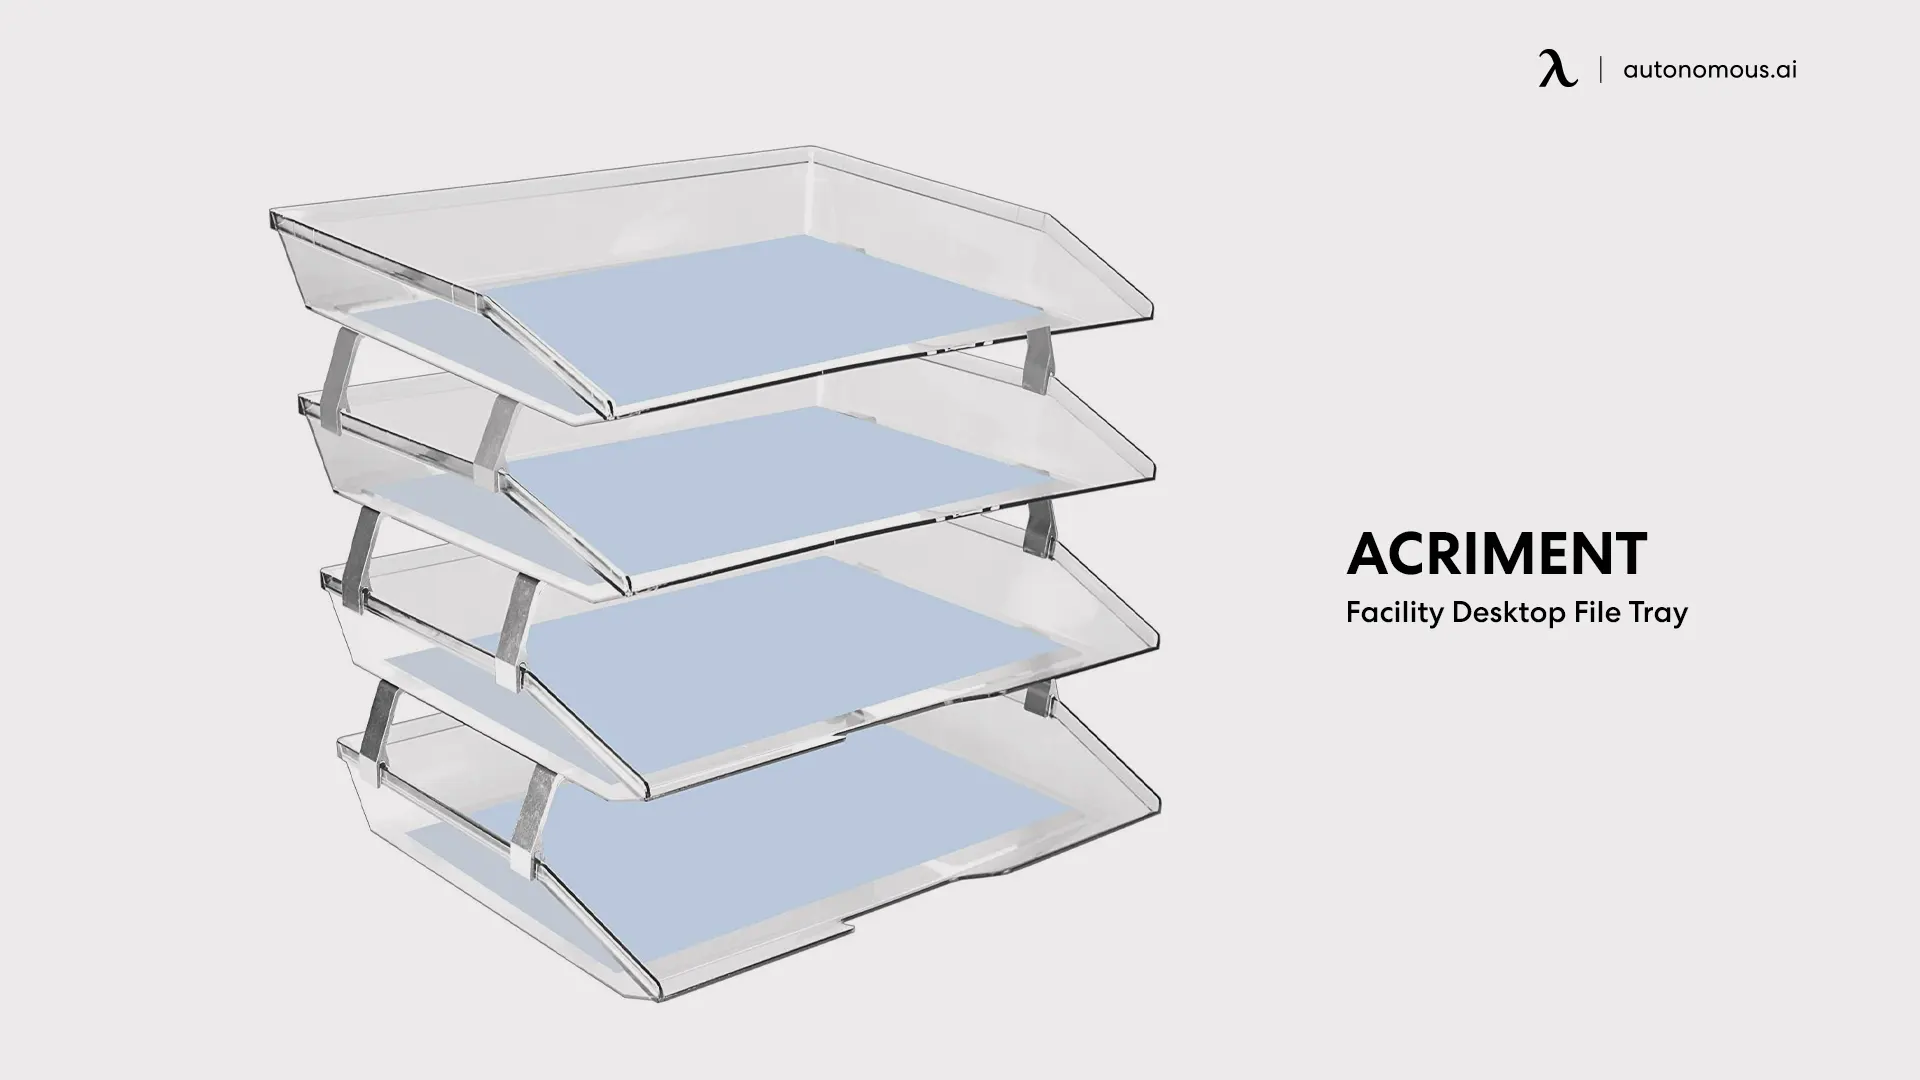 Facility Desktop File Tray by Acriment